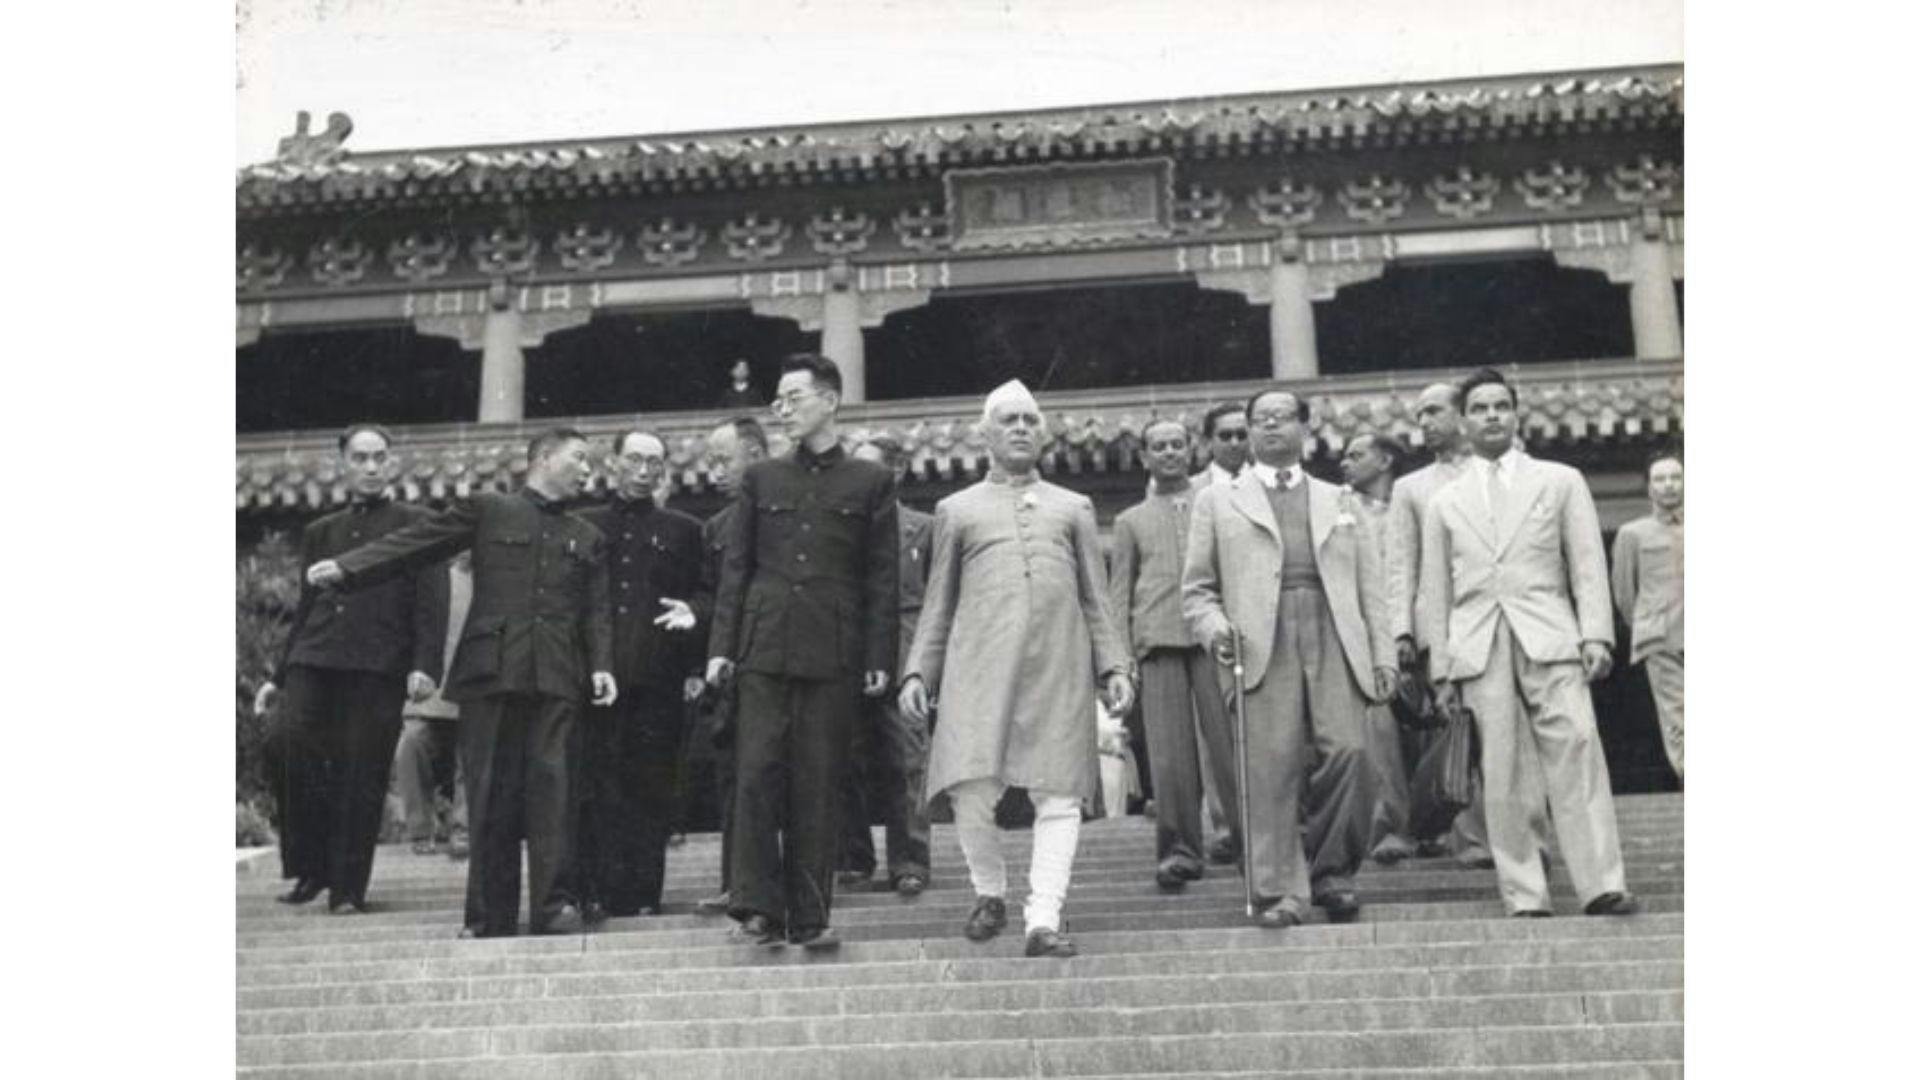 Jawaharlal Nehru’s visit to the Temple of Ling-Kou at Nanking | Wikimedia Commons